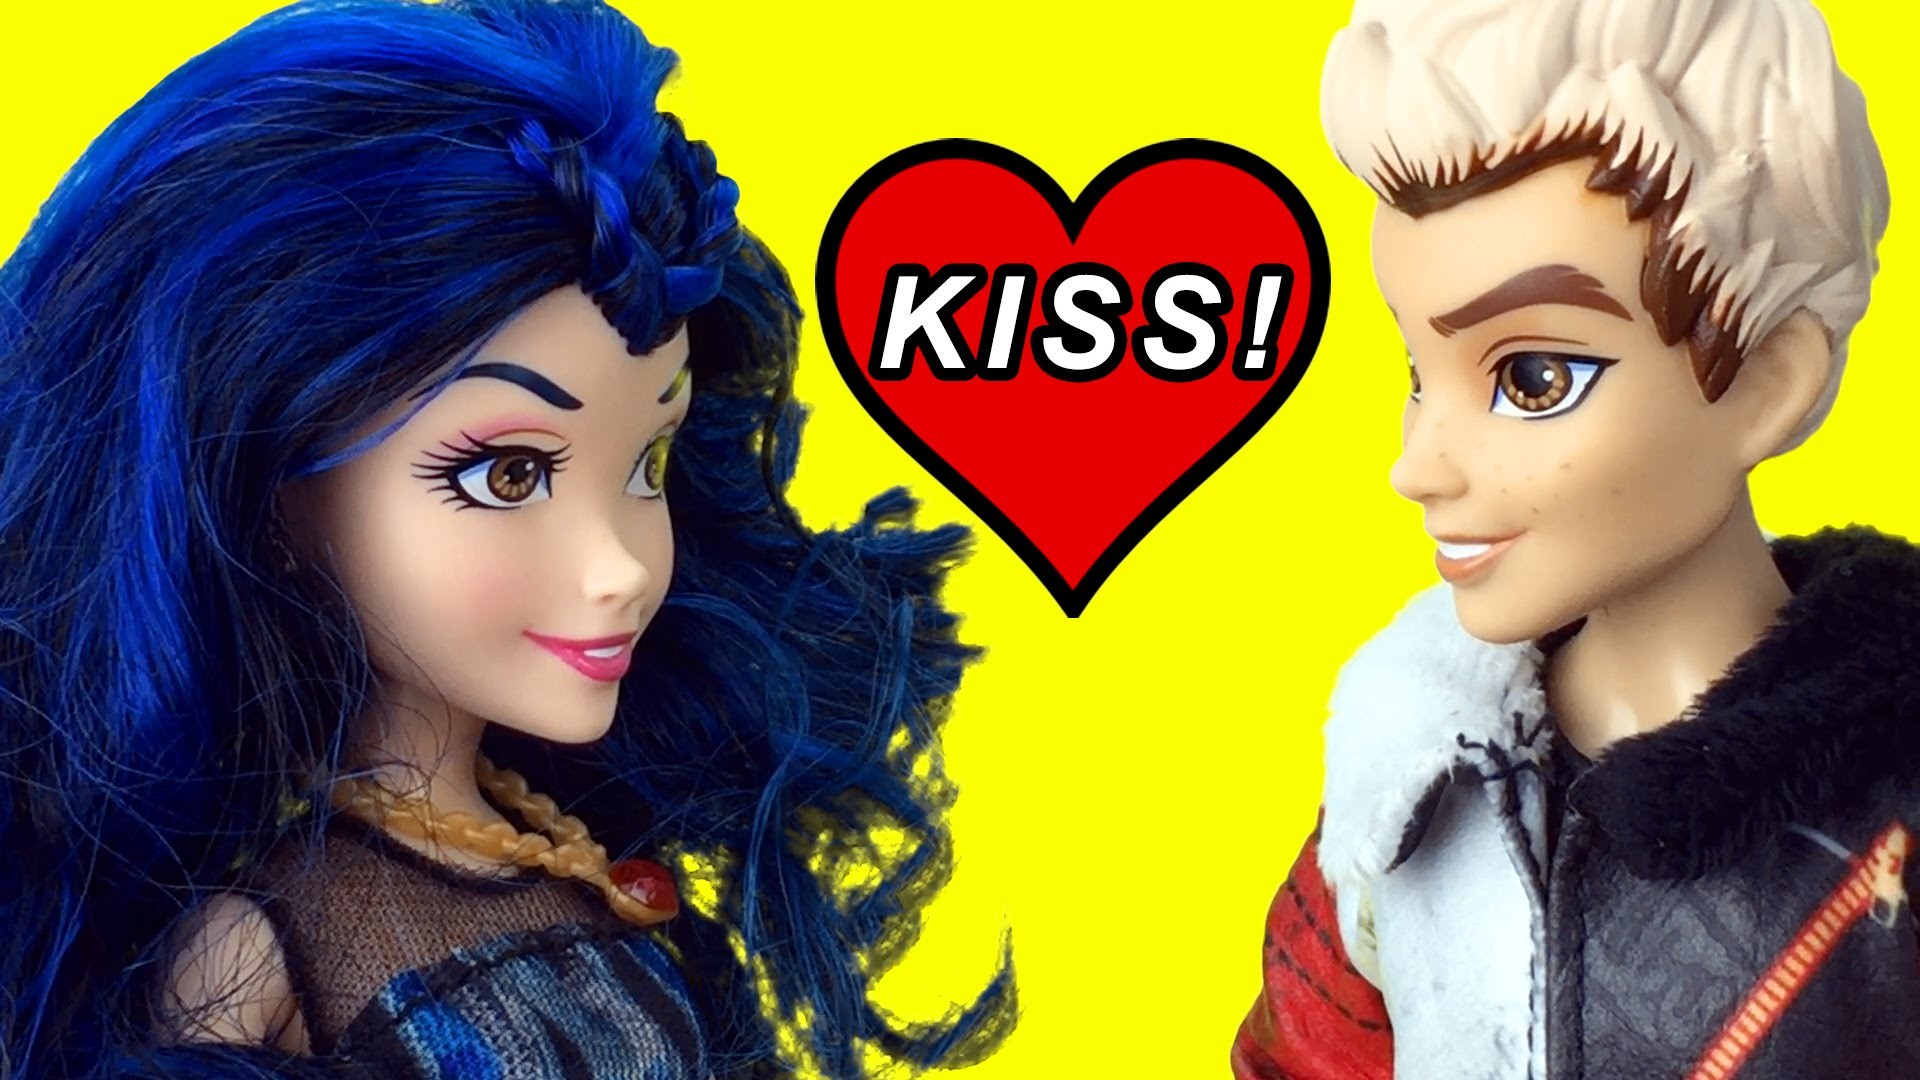 1920x1080 Disney Descendants Evie and Carlos Kiss with Mal and Ben Descendants Dolls  - YouTube